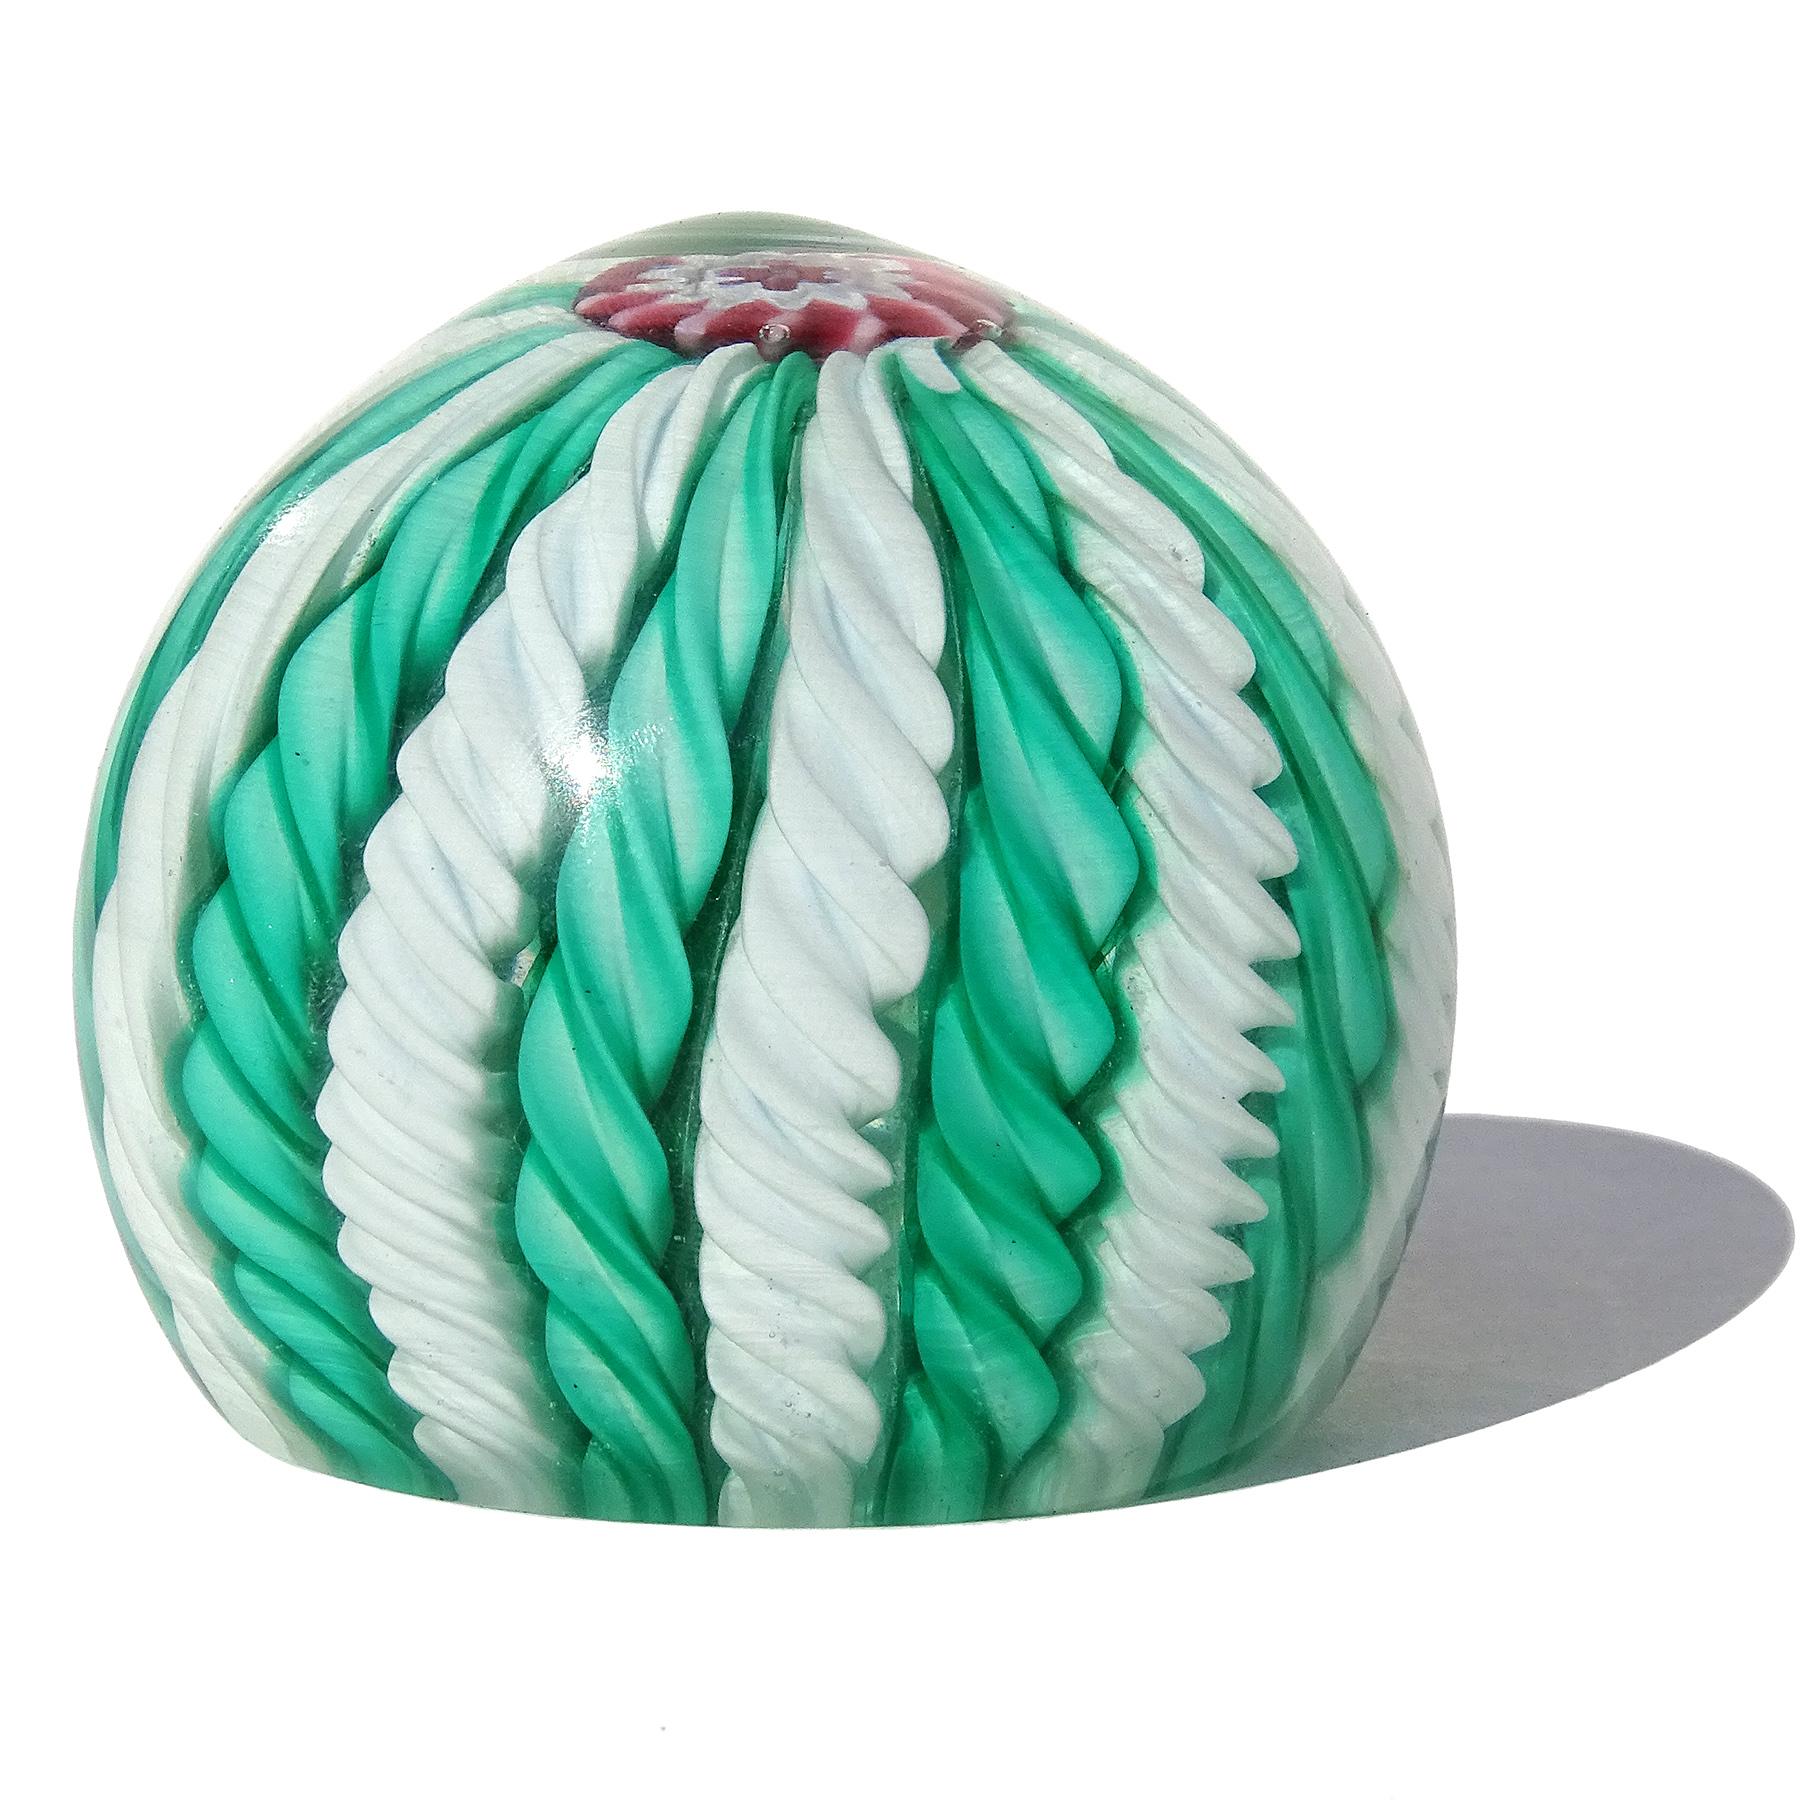 Beautiful and colorful vintage Murano hand blown green and white twisting ribbons Italian art glass paperweight. Documented to the Fratelli Toso company. This paperweights are often referred to as 